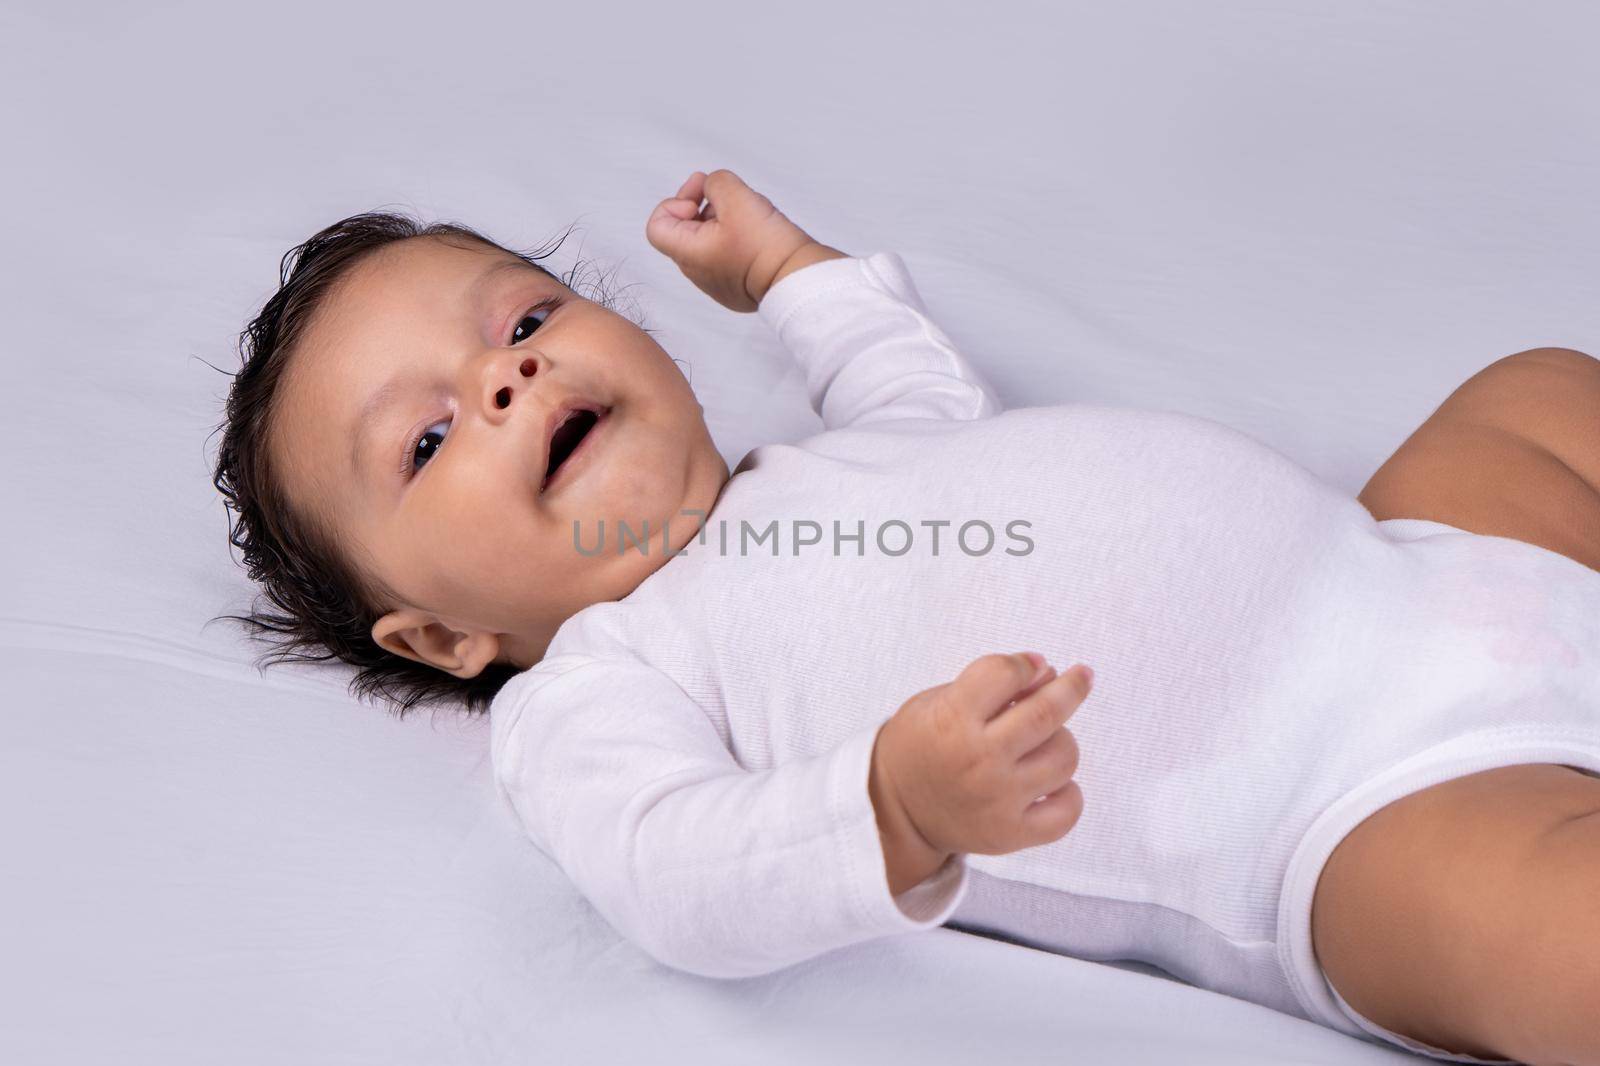 Infant lying on his back smiling and looking at the camera